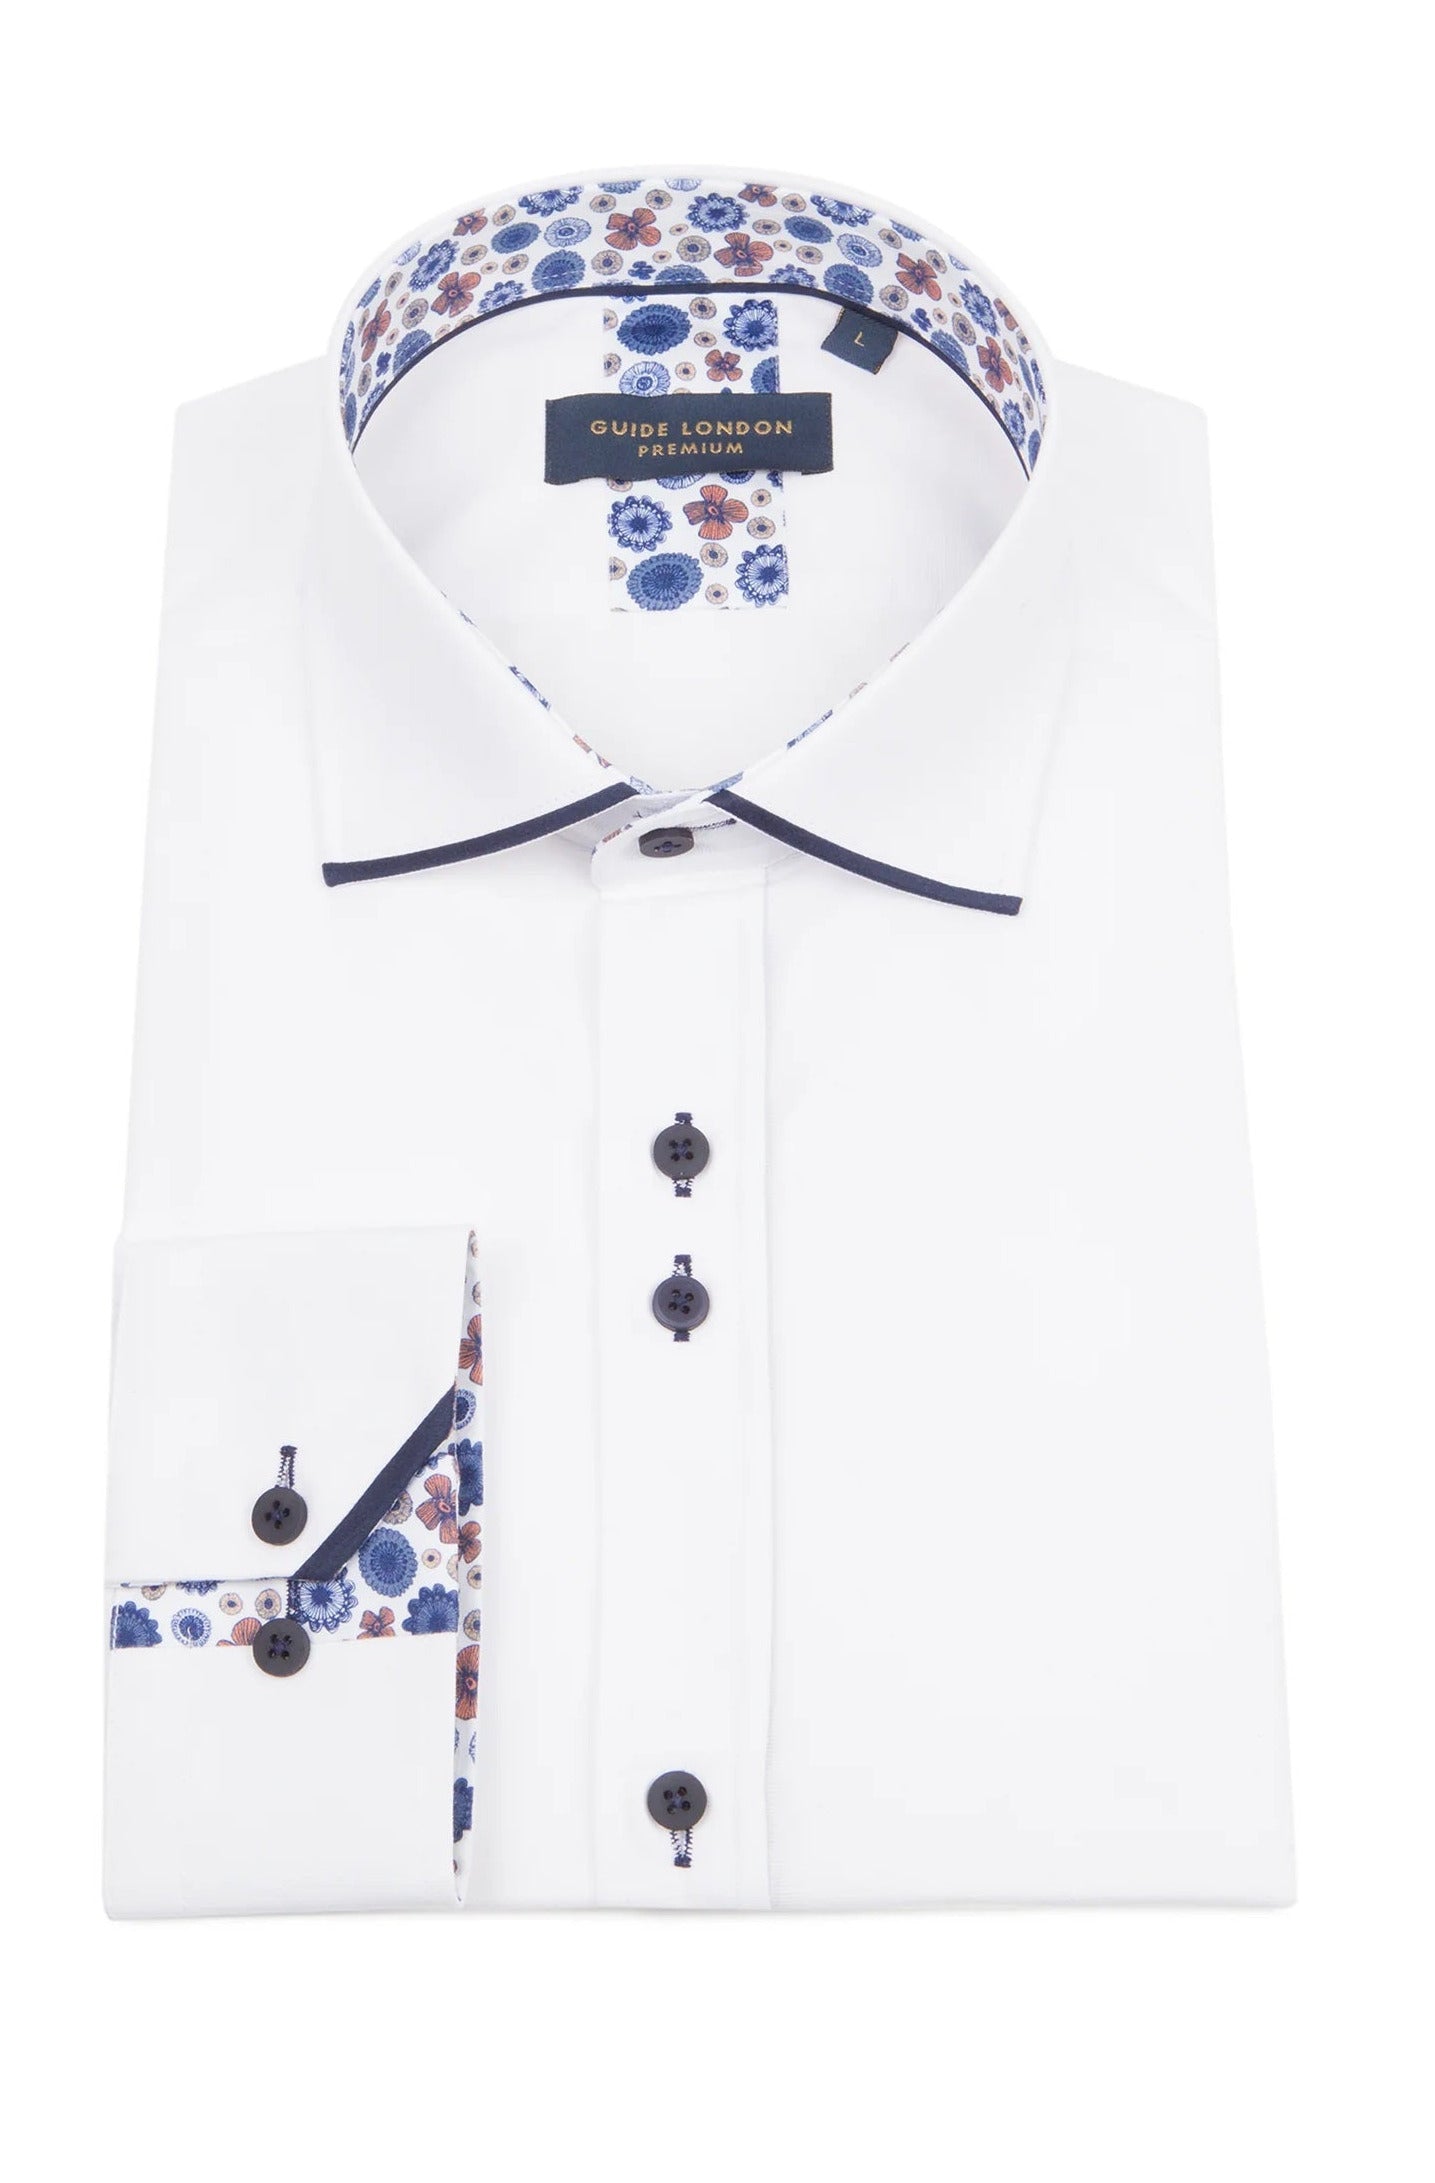 Guide London Long Sleeve Contrast Collar Tip Shirt LS76586 - WHITE/NAVY